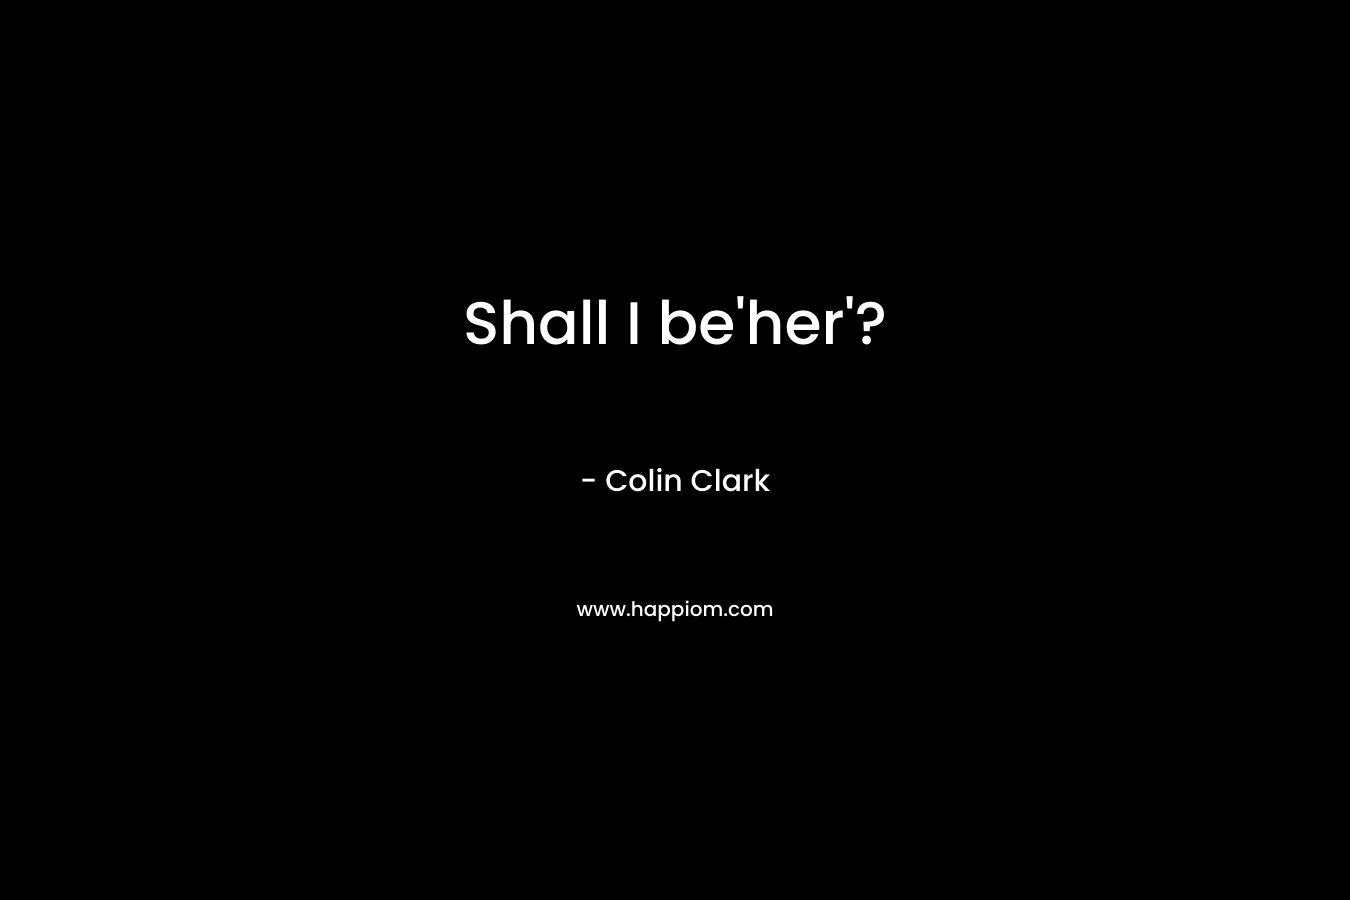 Shall I be'her'?